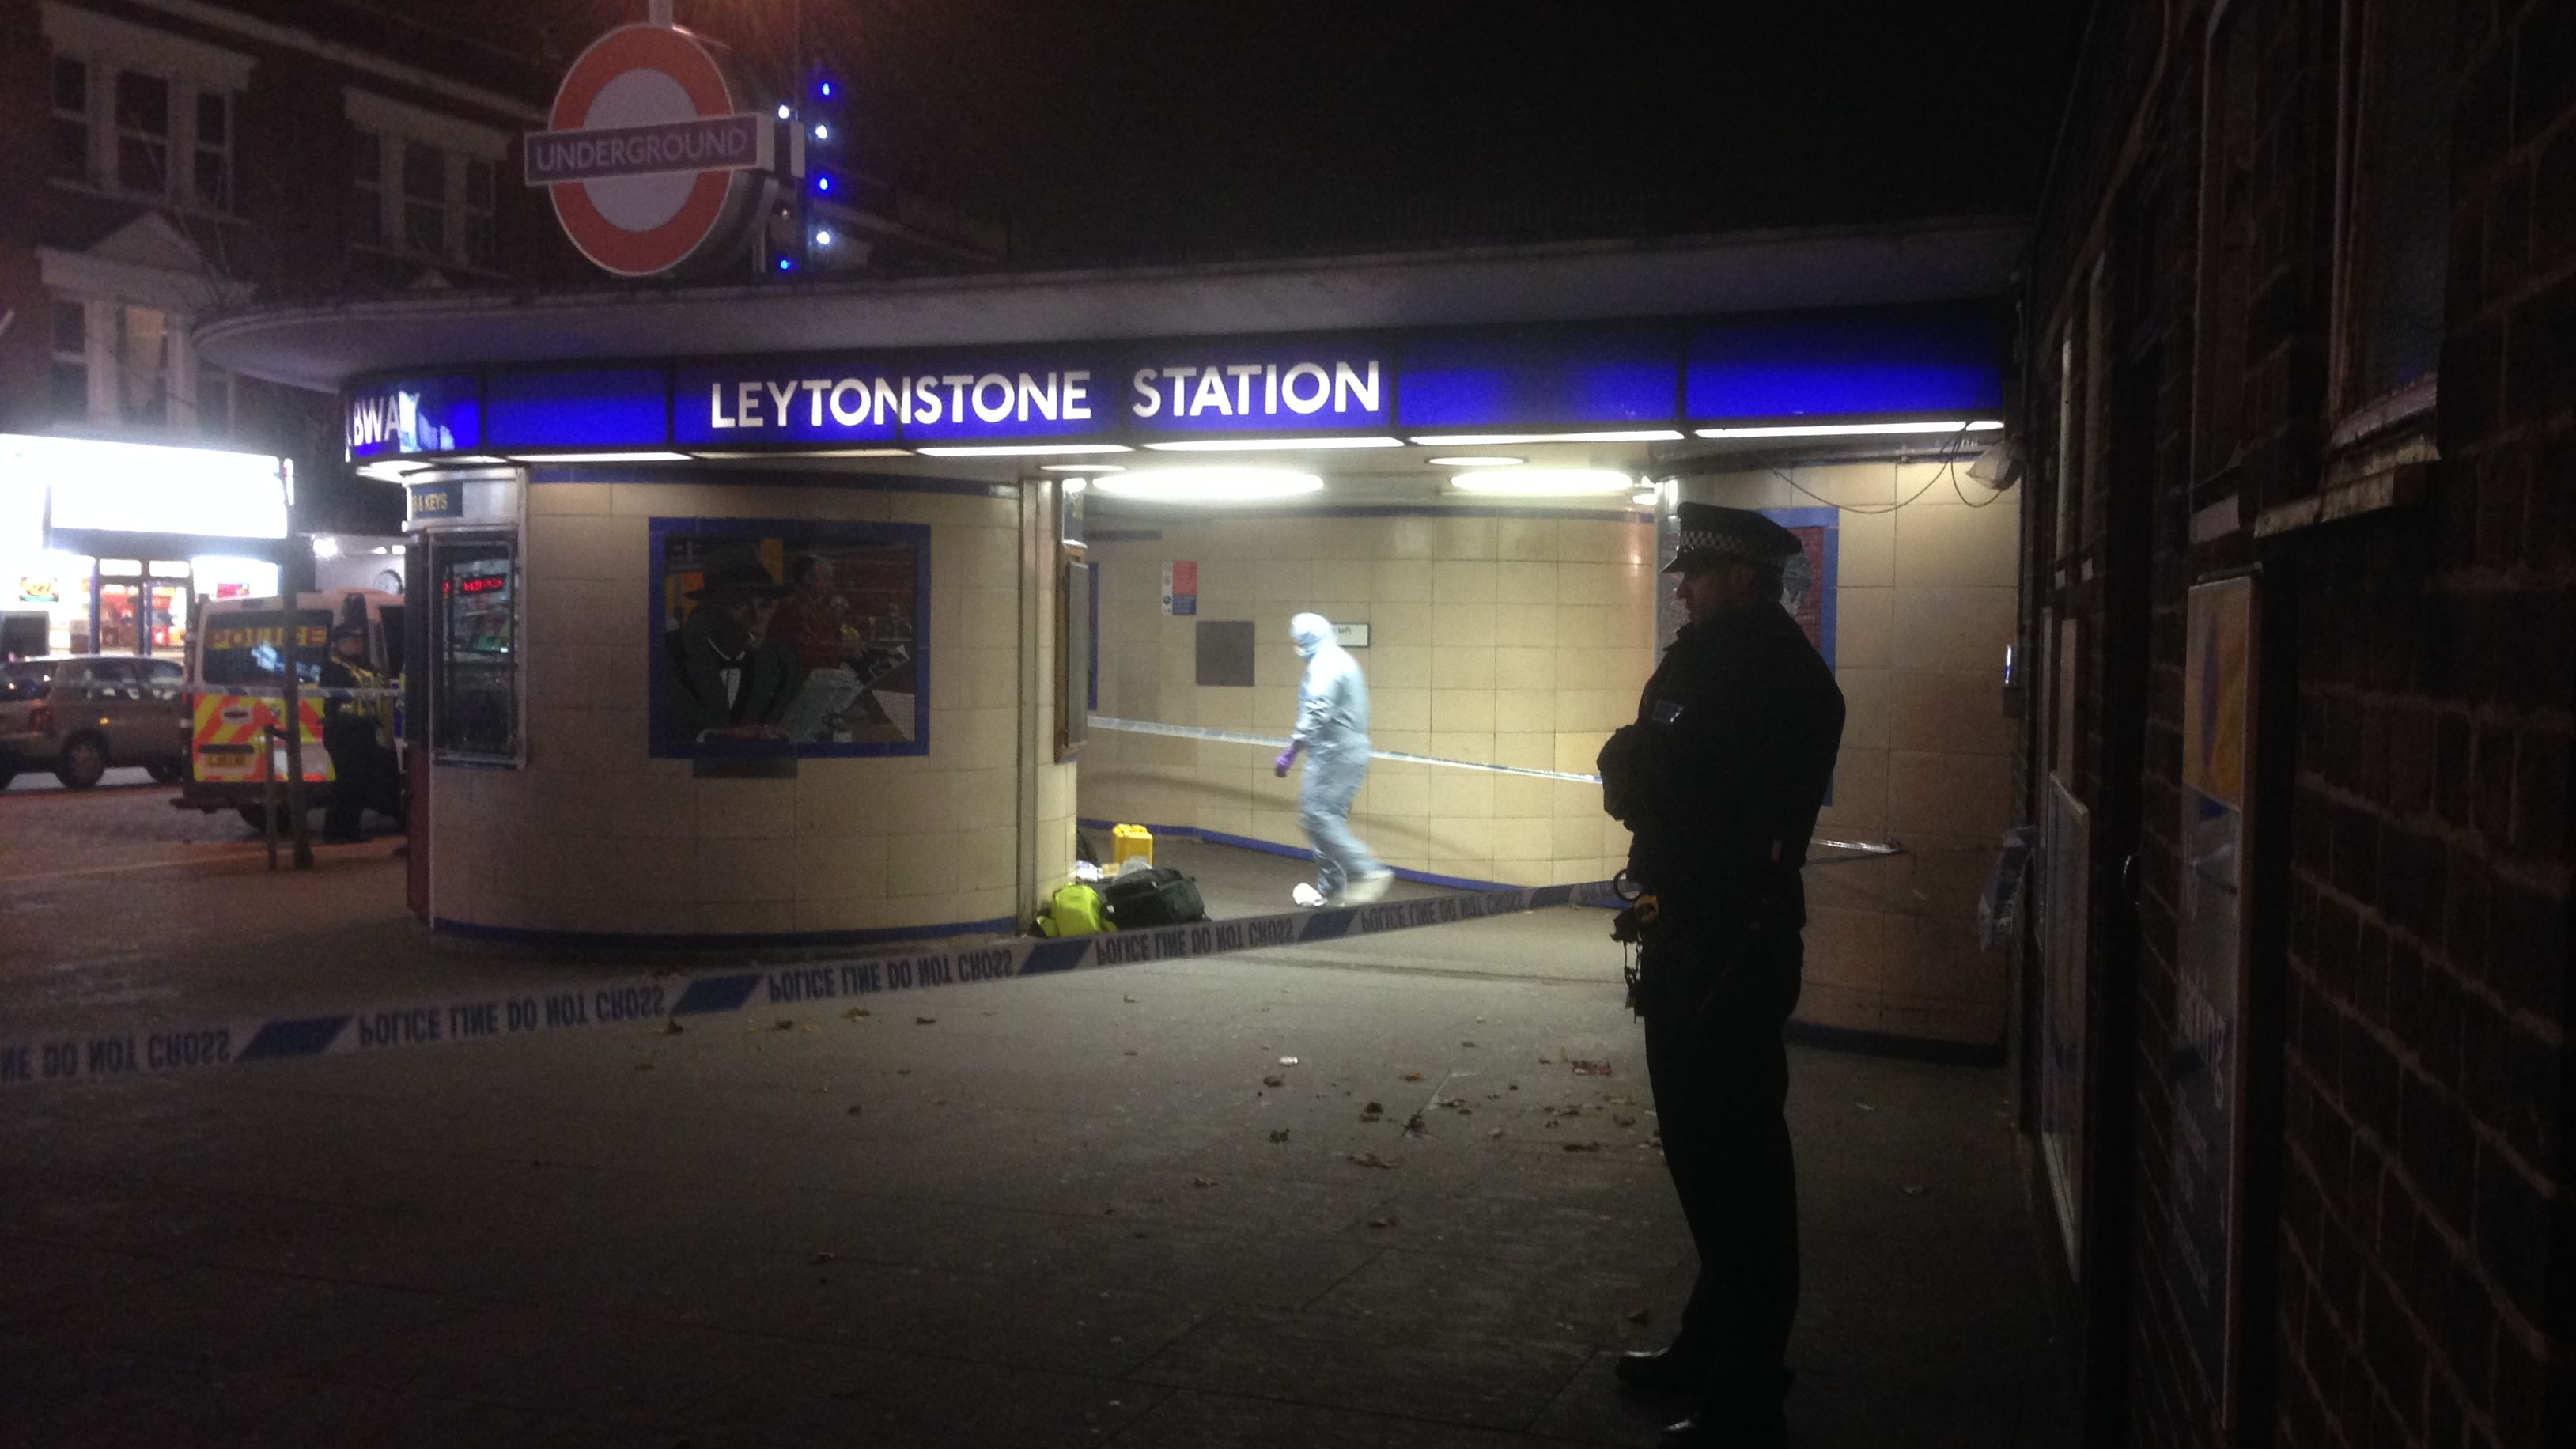 The scene outside the Leytonstone stations after a stabbing incident took place. 